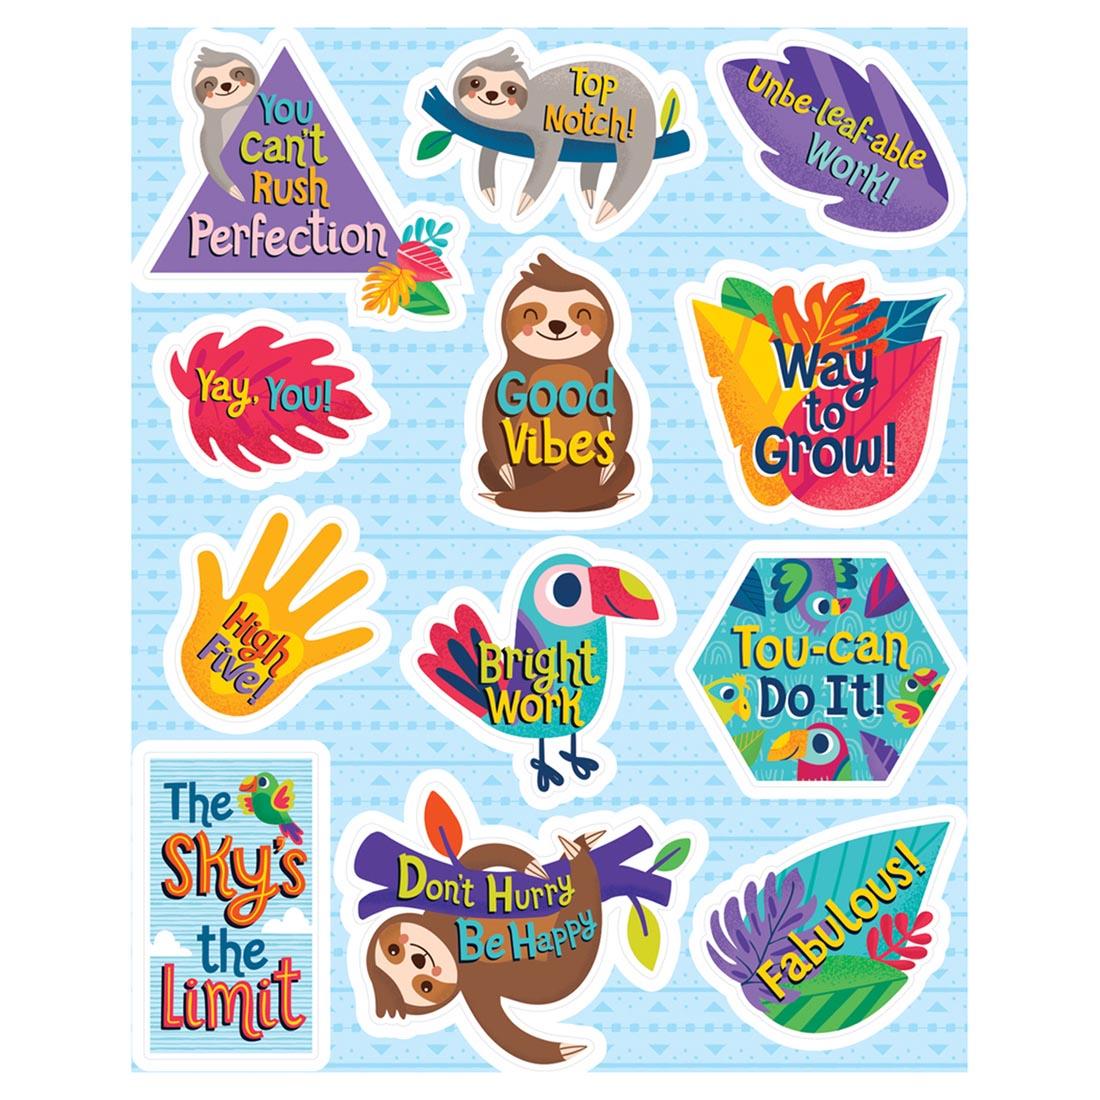 Motivational Shape Stickers from the One World Collection saying You Can't Rush Perfection, Top Notch and Way to Grow